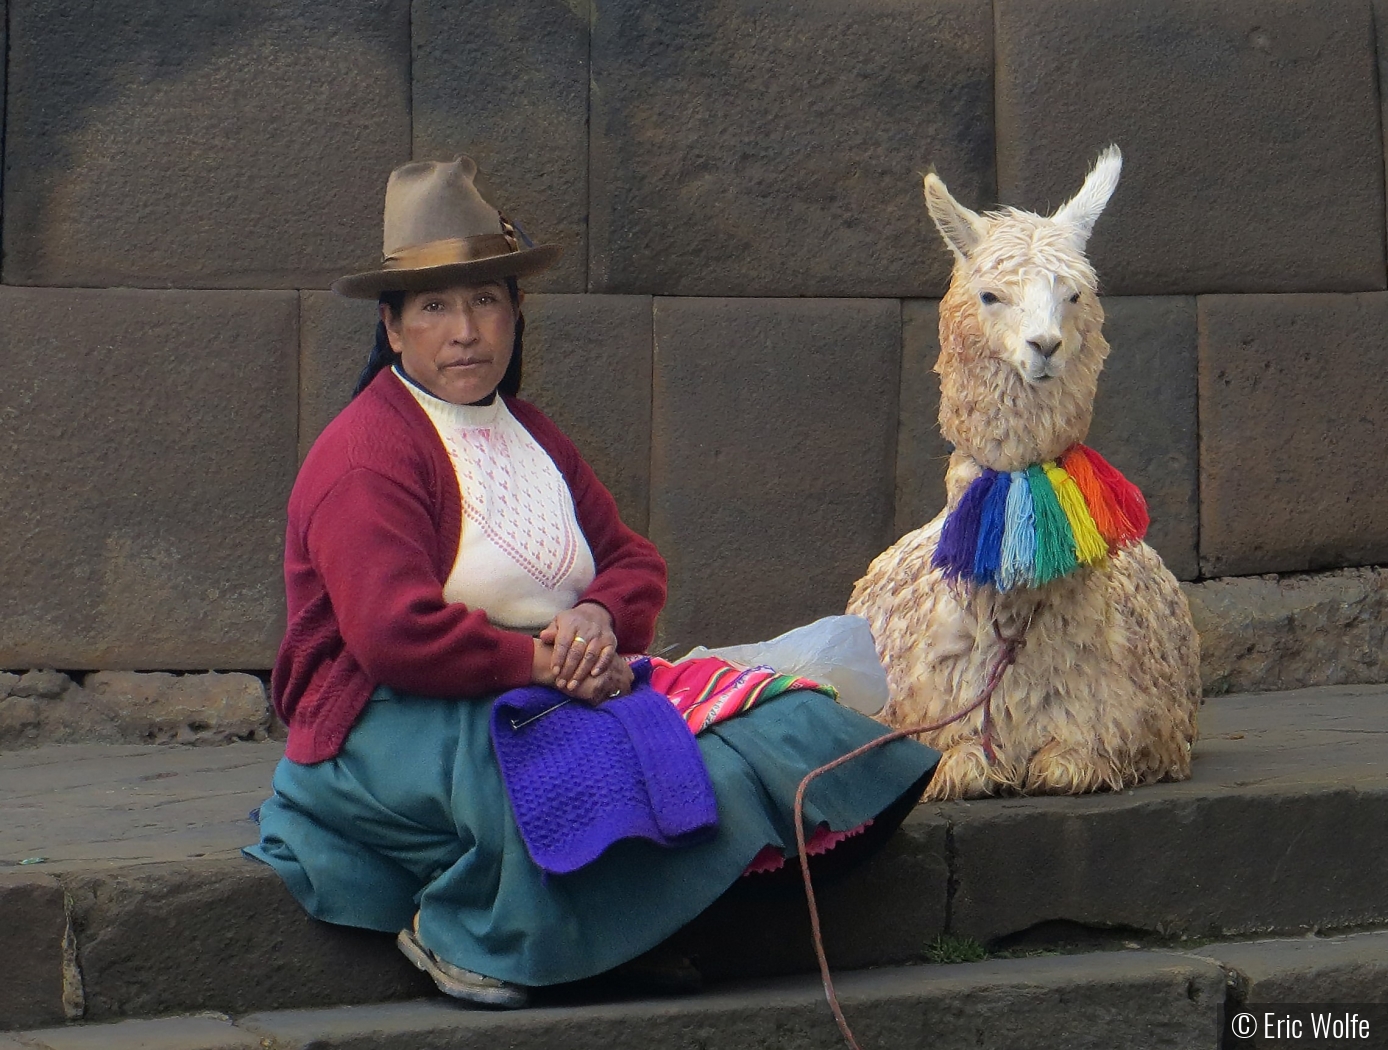 I tell my llama to rock the colors and just own it baby by Eric Wolfe